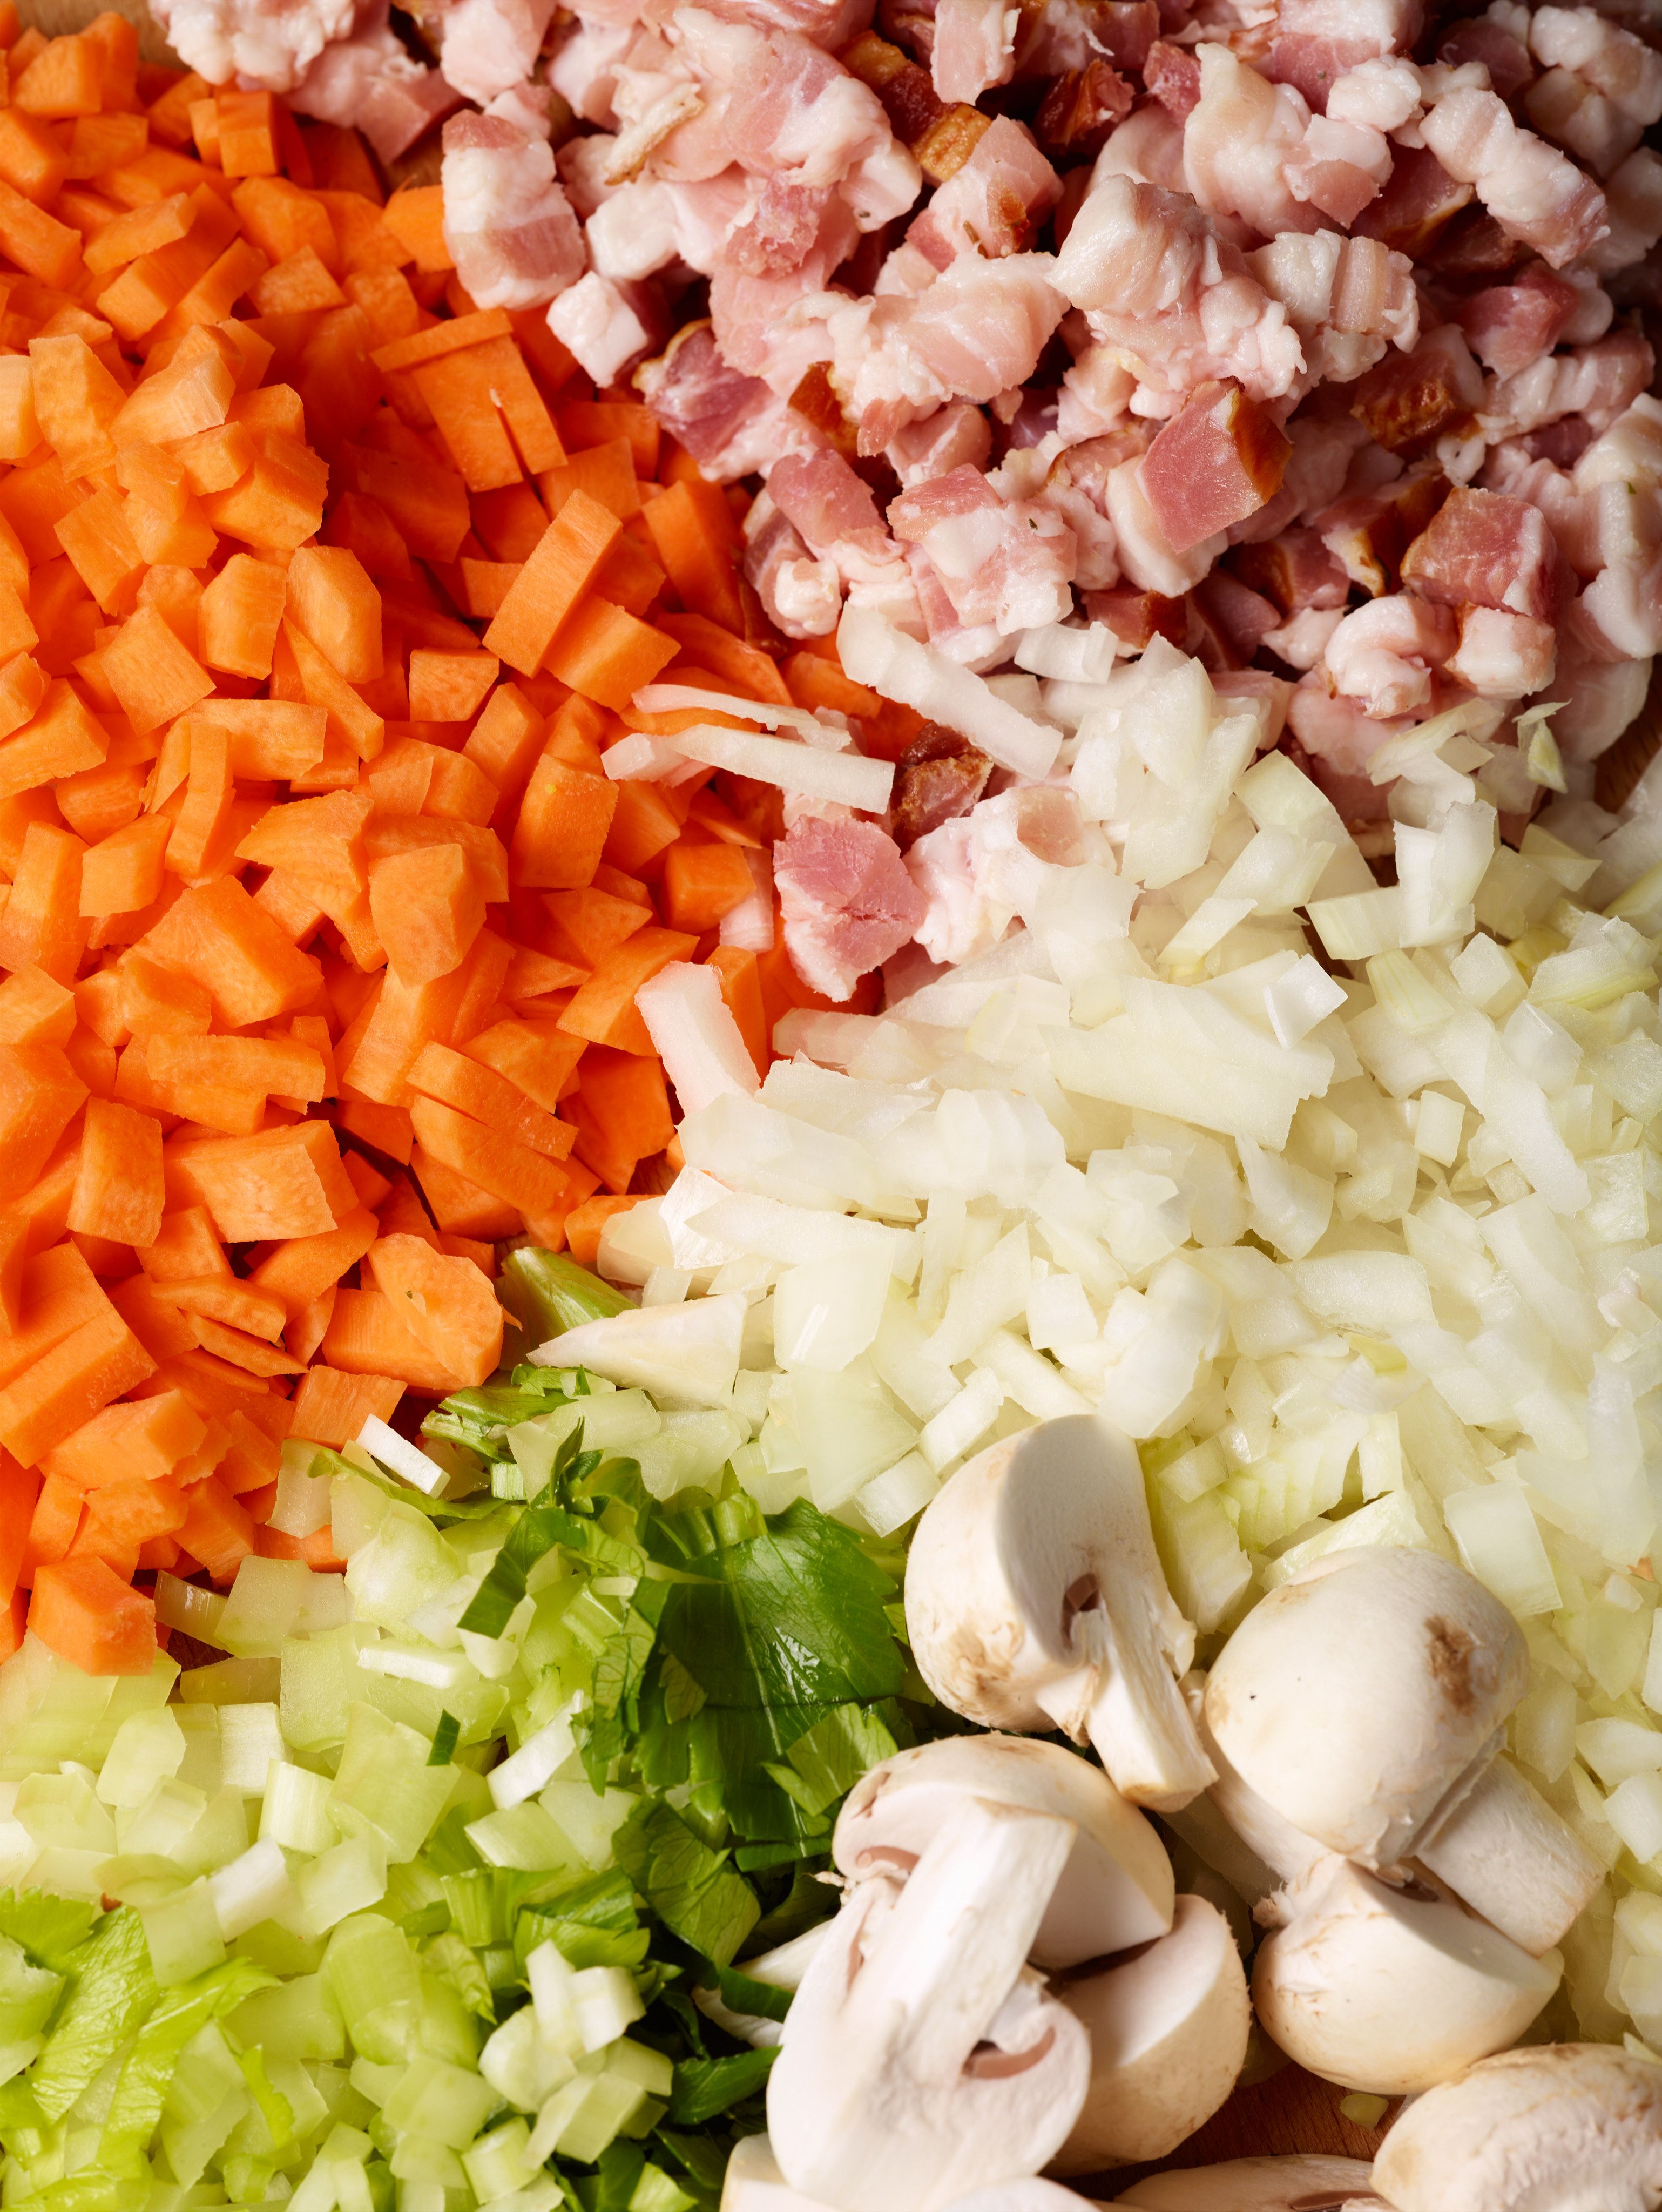 Diced carrots, ham, onions and celery as well as quartered mushrooms